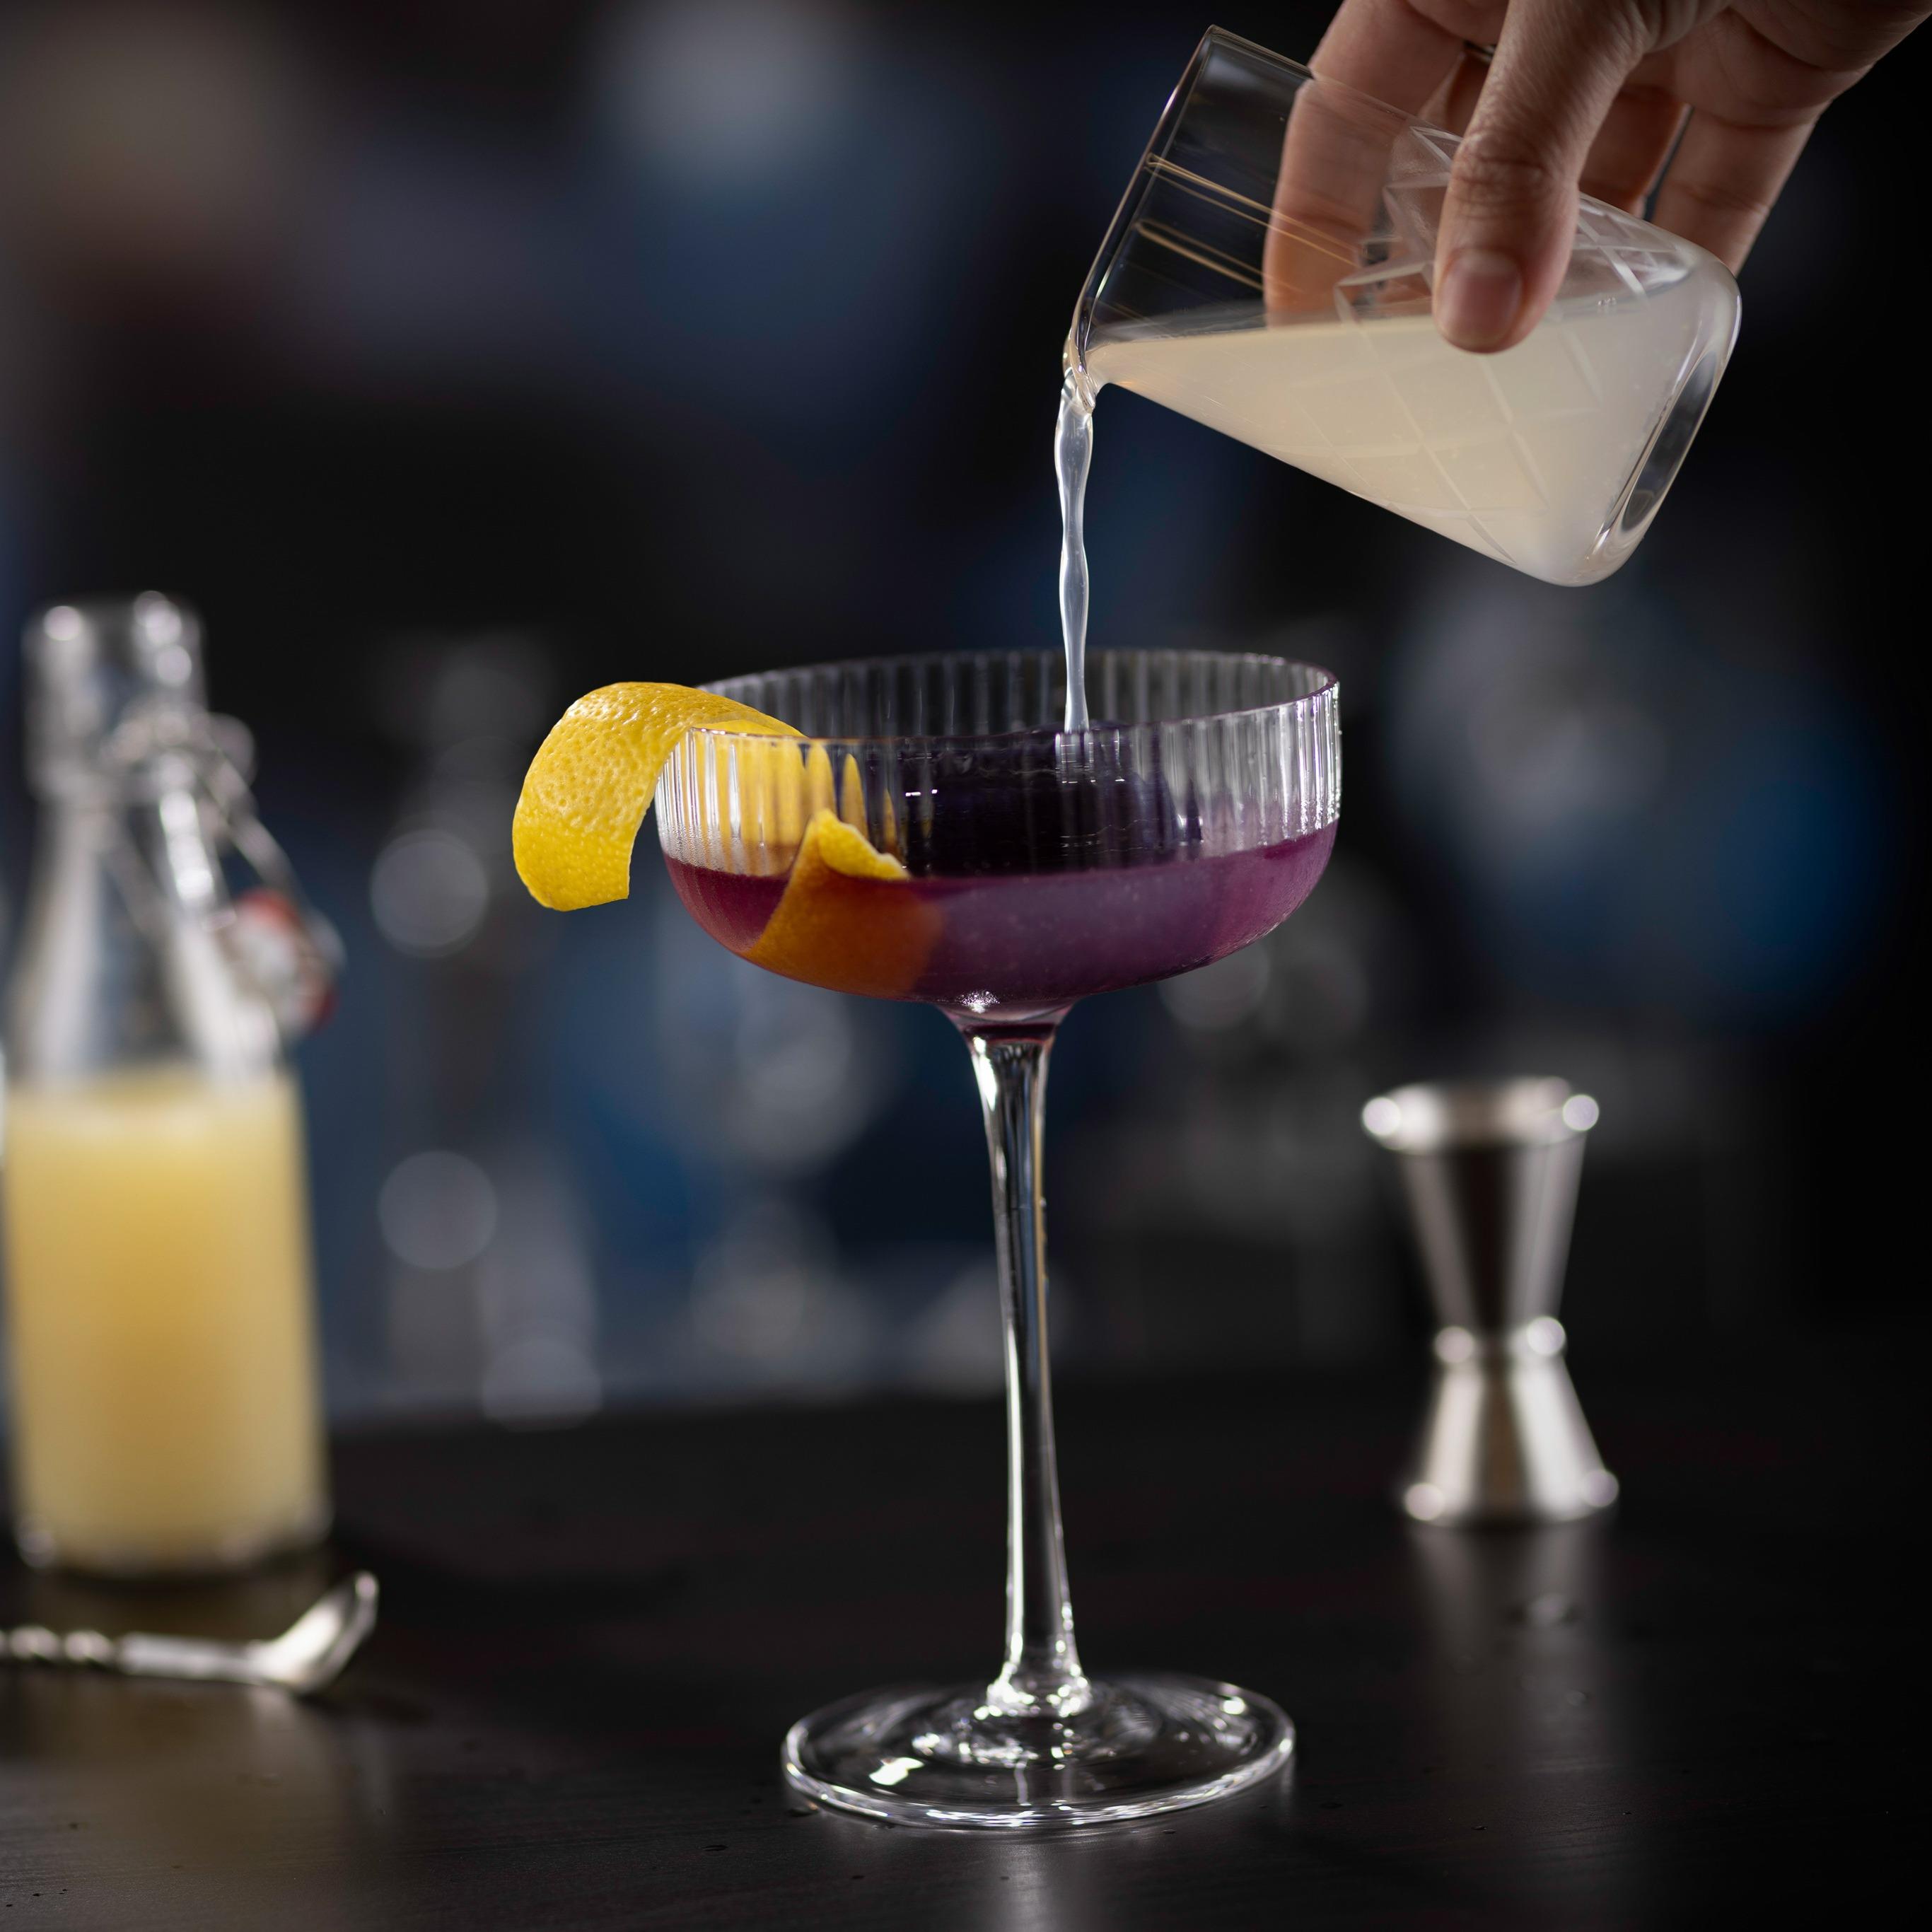 Our signature Hope Diamond Cocktail, featuring Grey Goose vodka, butterfly tea and a purple diamond ice cube